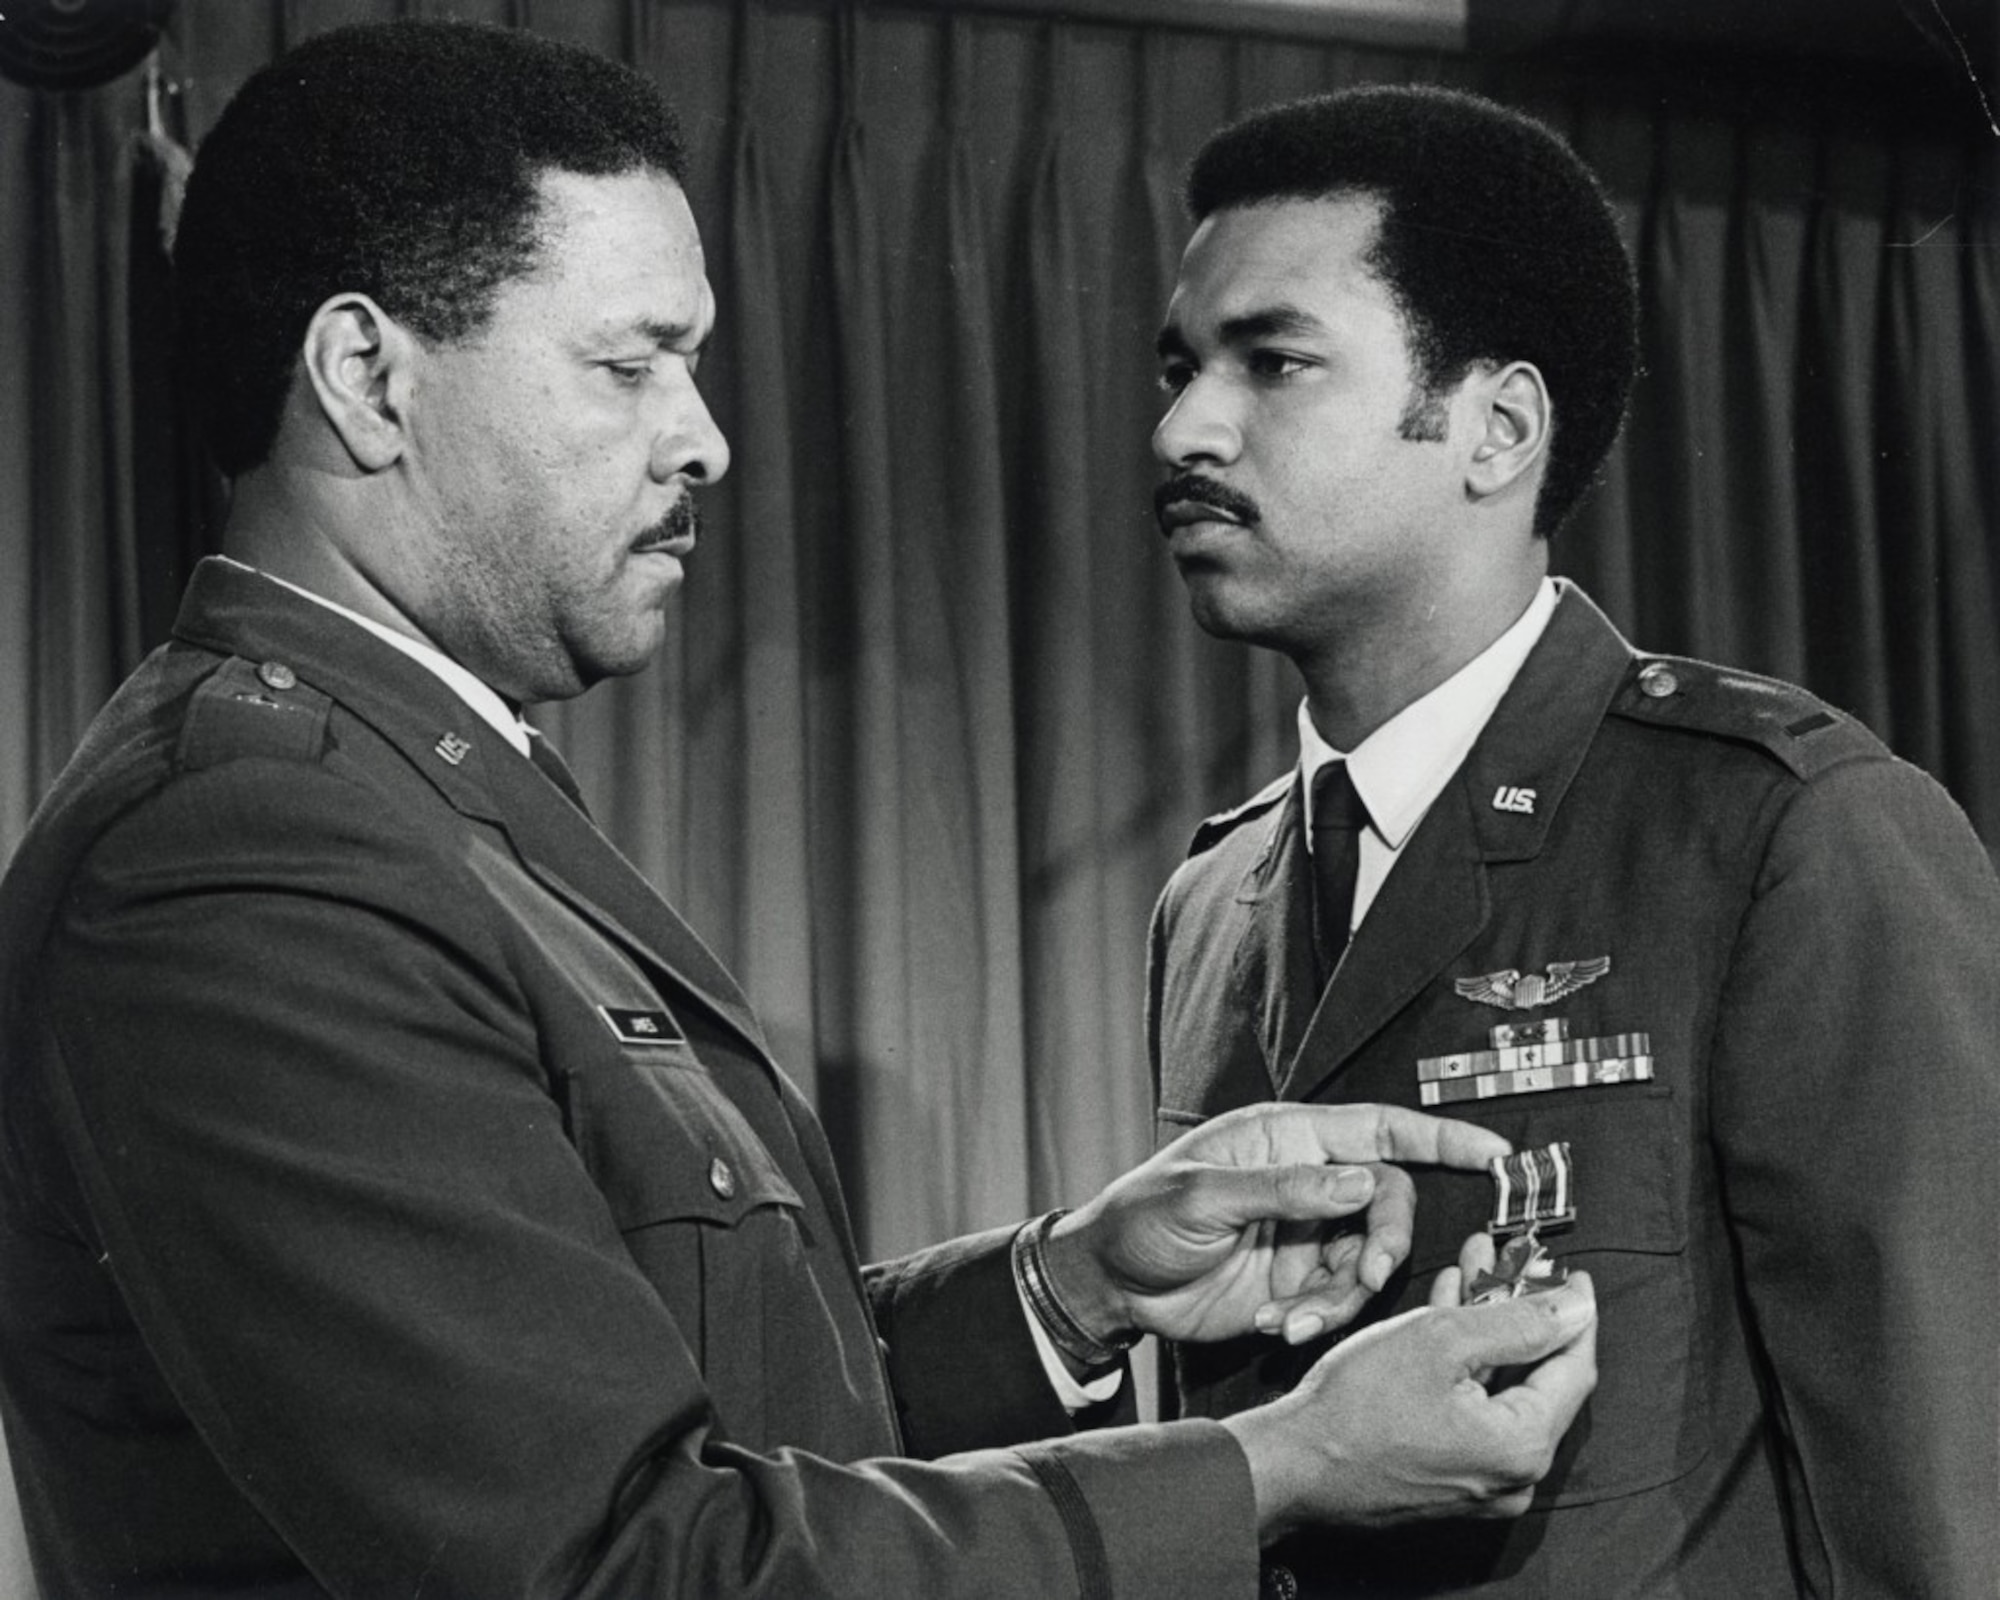 Daniel James III receives an award from his father, Gen. Daniel "Chappie" James Jr.  James, who followed in his father's footsteps, served in the Air Force and Air National Guard rising to the rank of Lieutenant General and becoming the first African-American to take command as director of the Air National Guard before retiring in 2006. (U.S. Air Force Photo)